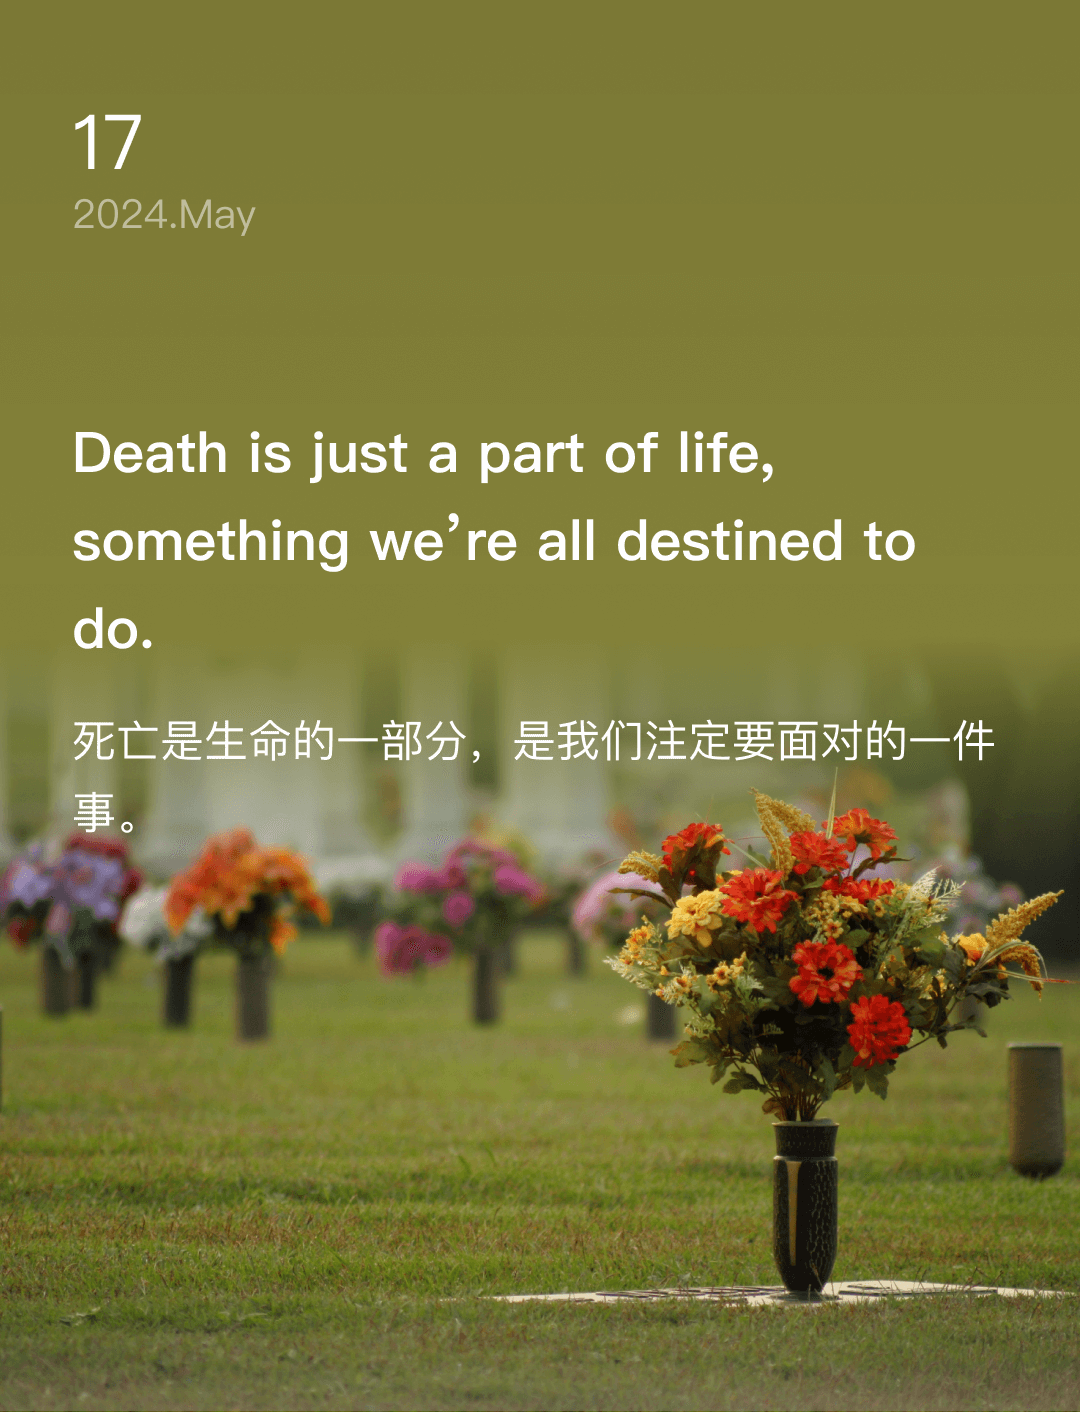 Death is just a part of life, something we’re all destined to do.